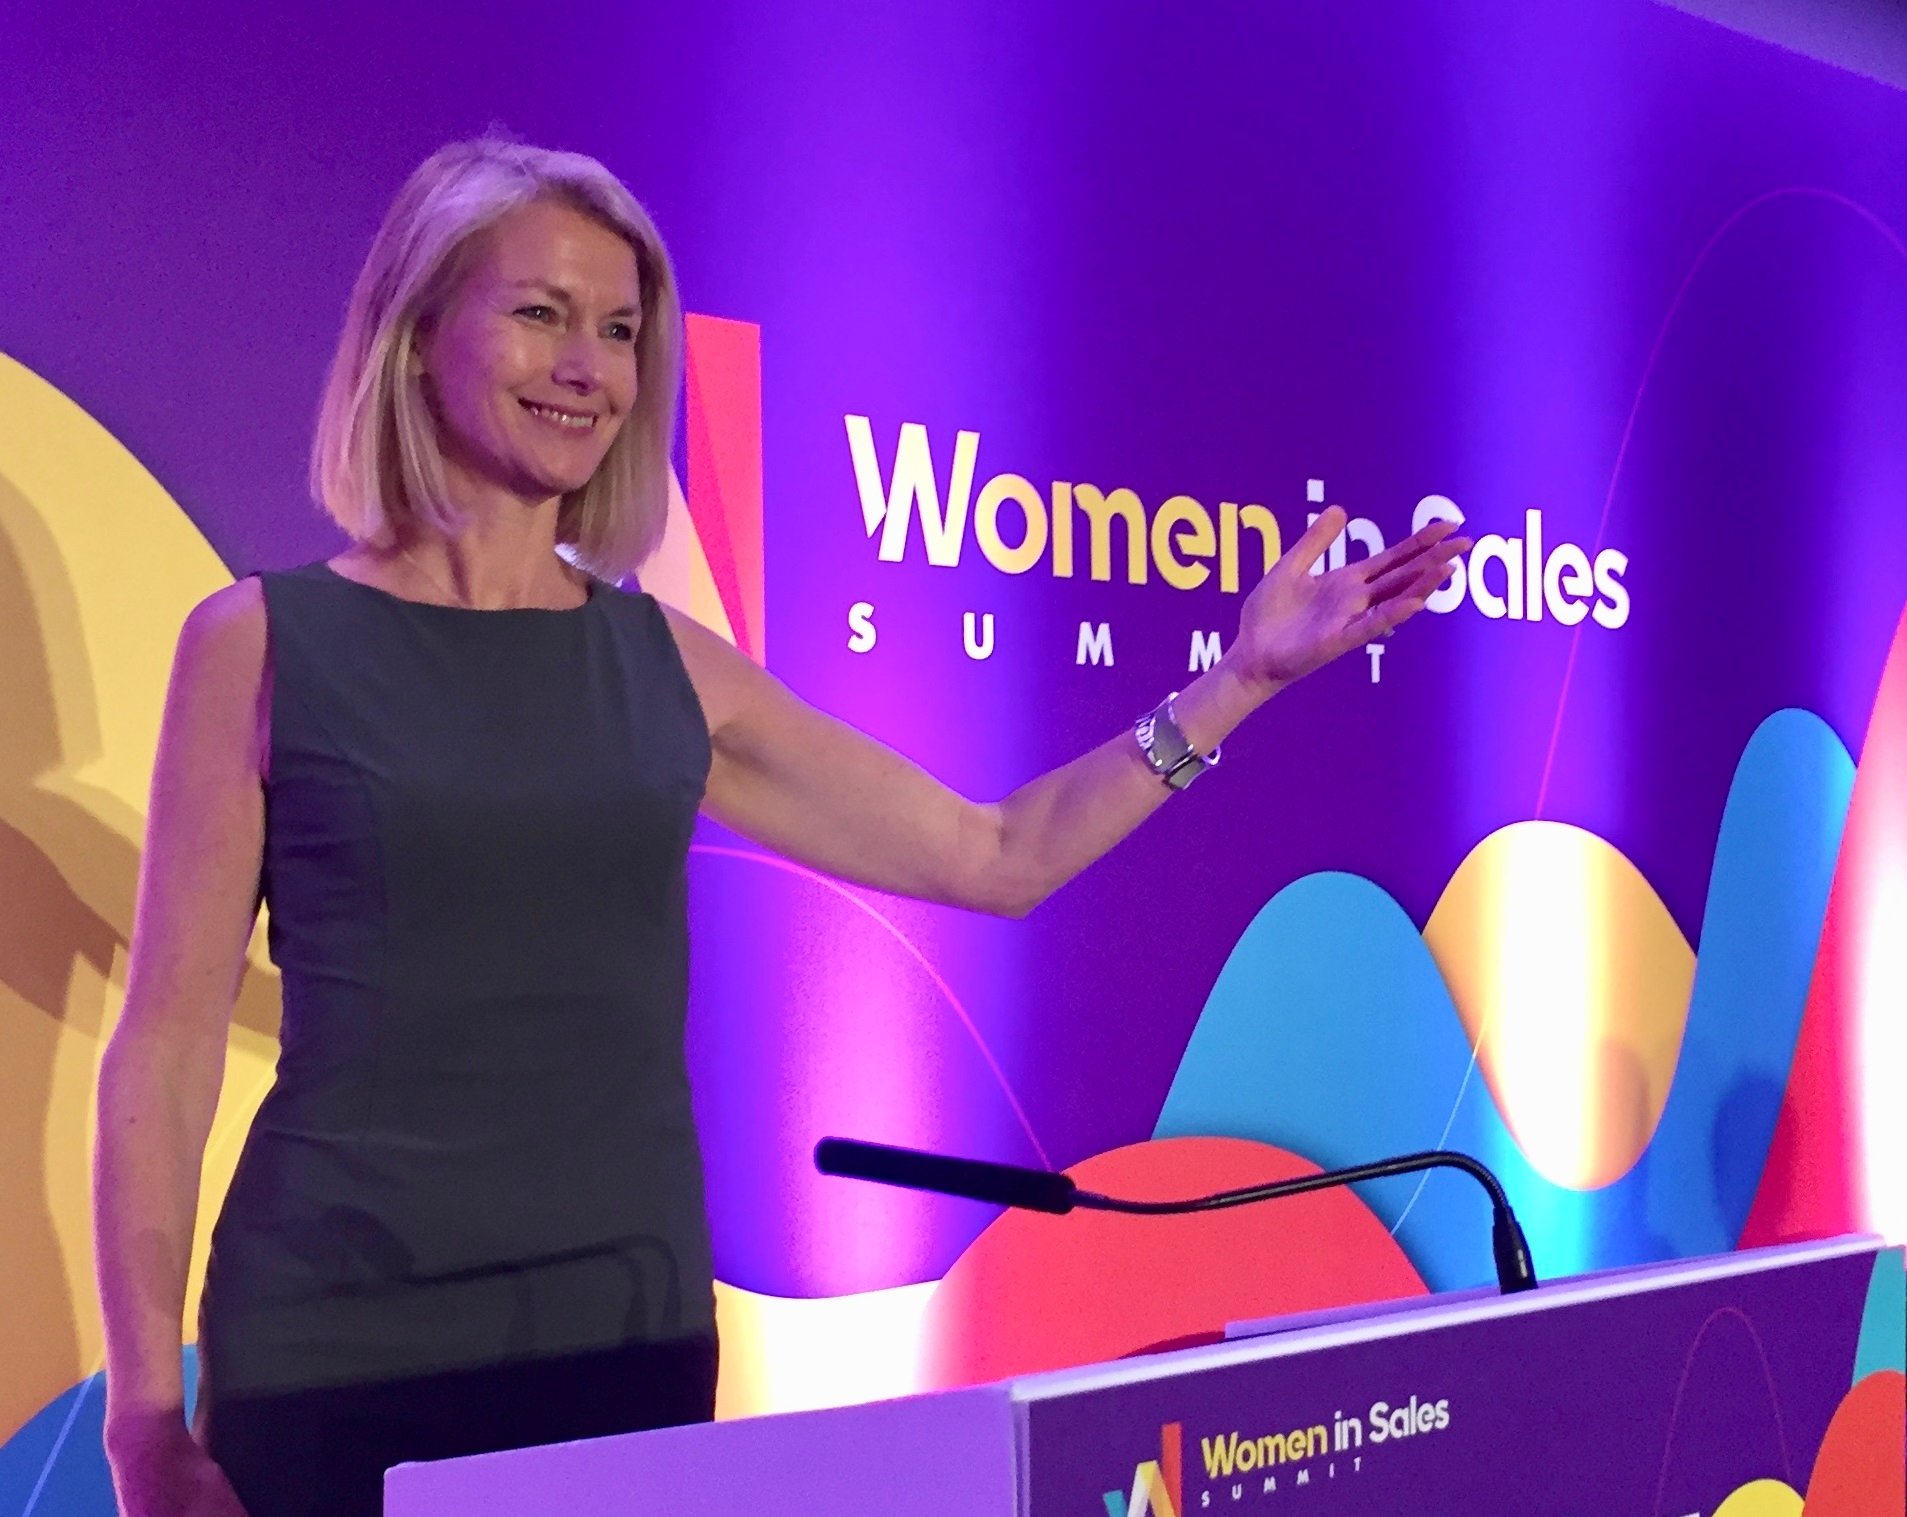 Sarah at Women in Sales - Cropped